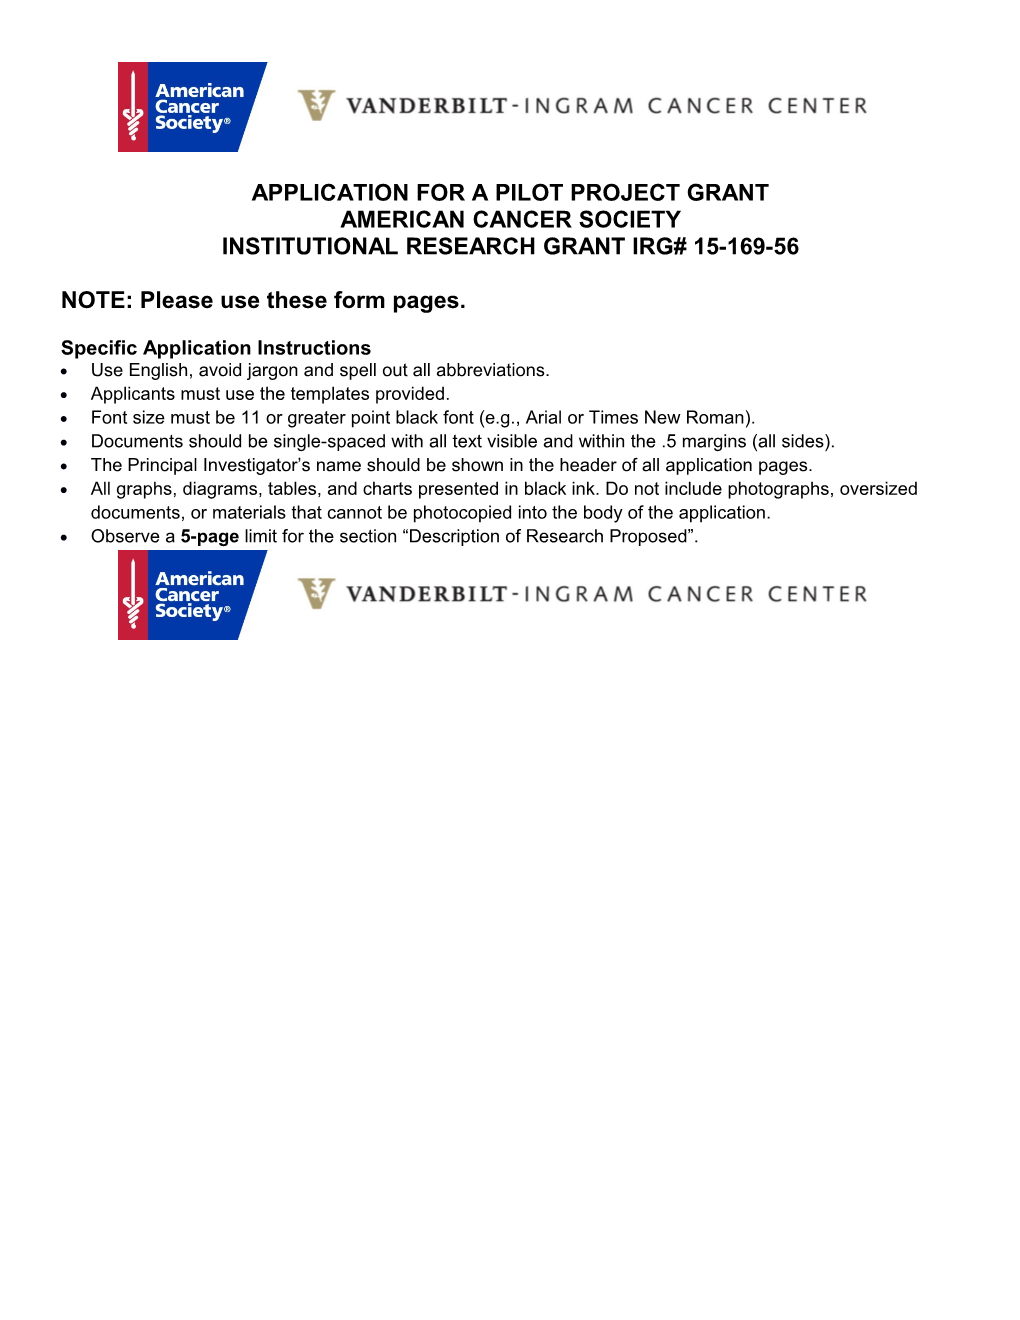 Application for a Pilot Project Grant from American Cancer Society